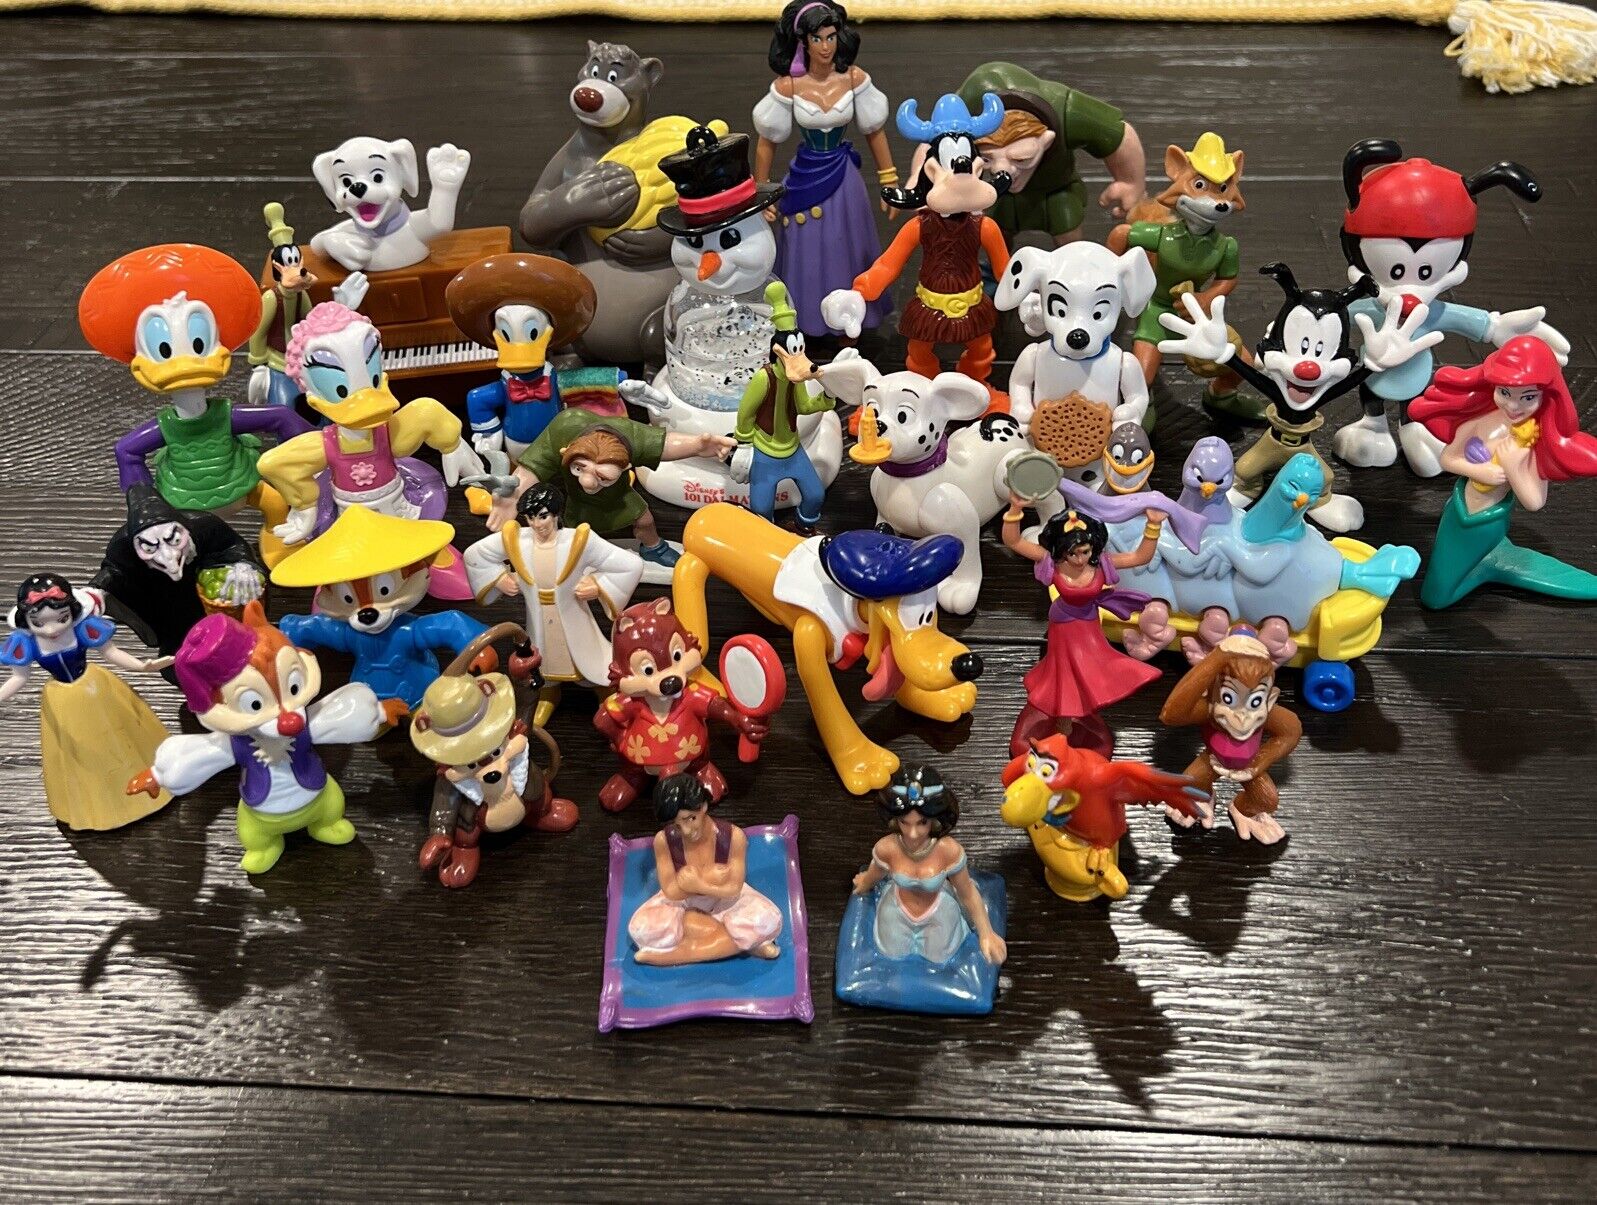 VINTAGE DISNEY FIGURES - LOT OF 32 MIXED MOVIE CARTOON CHARACTERS - RARE